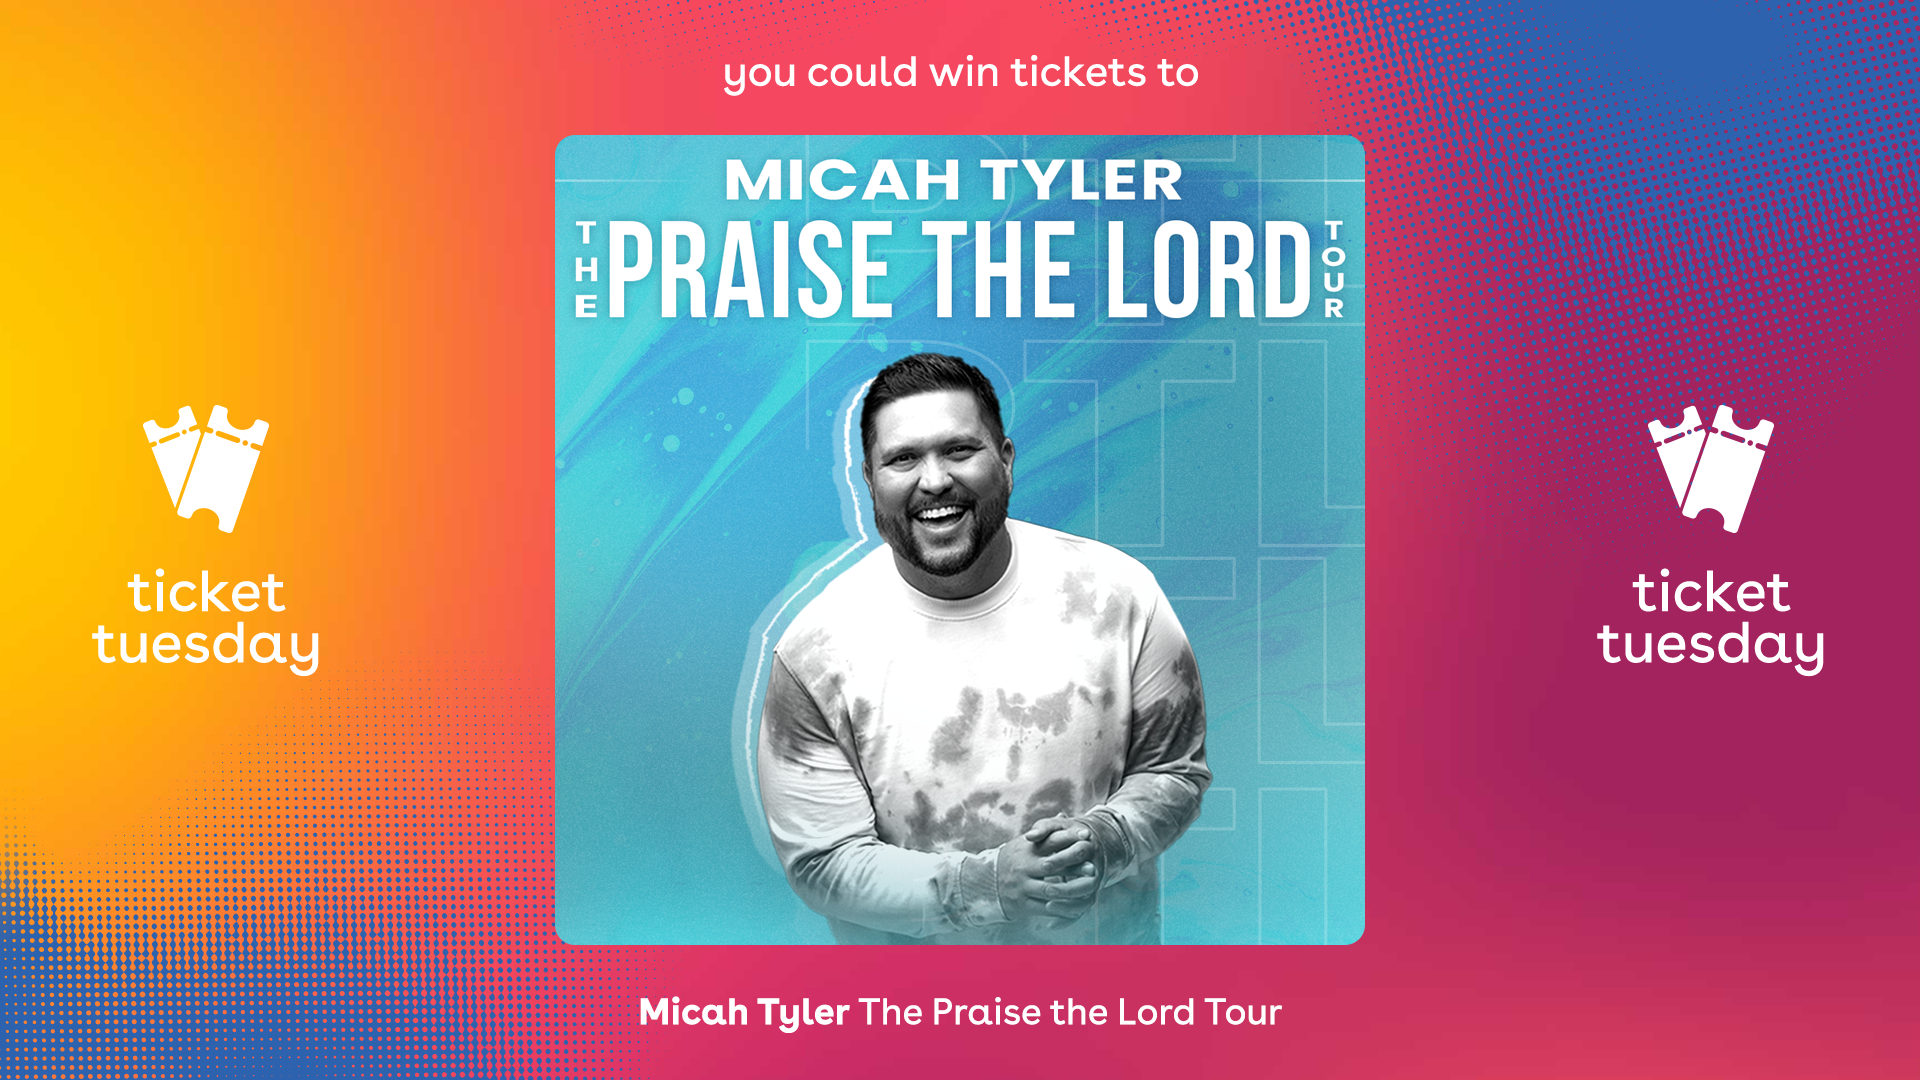 Listen to BRIGHT-FM on Tuesday, September 12th for your chance to win two tickets to see Micah Tyler's concert!